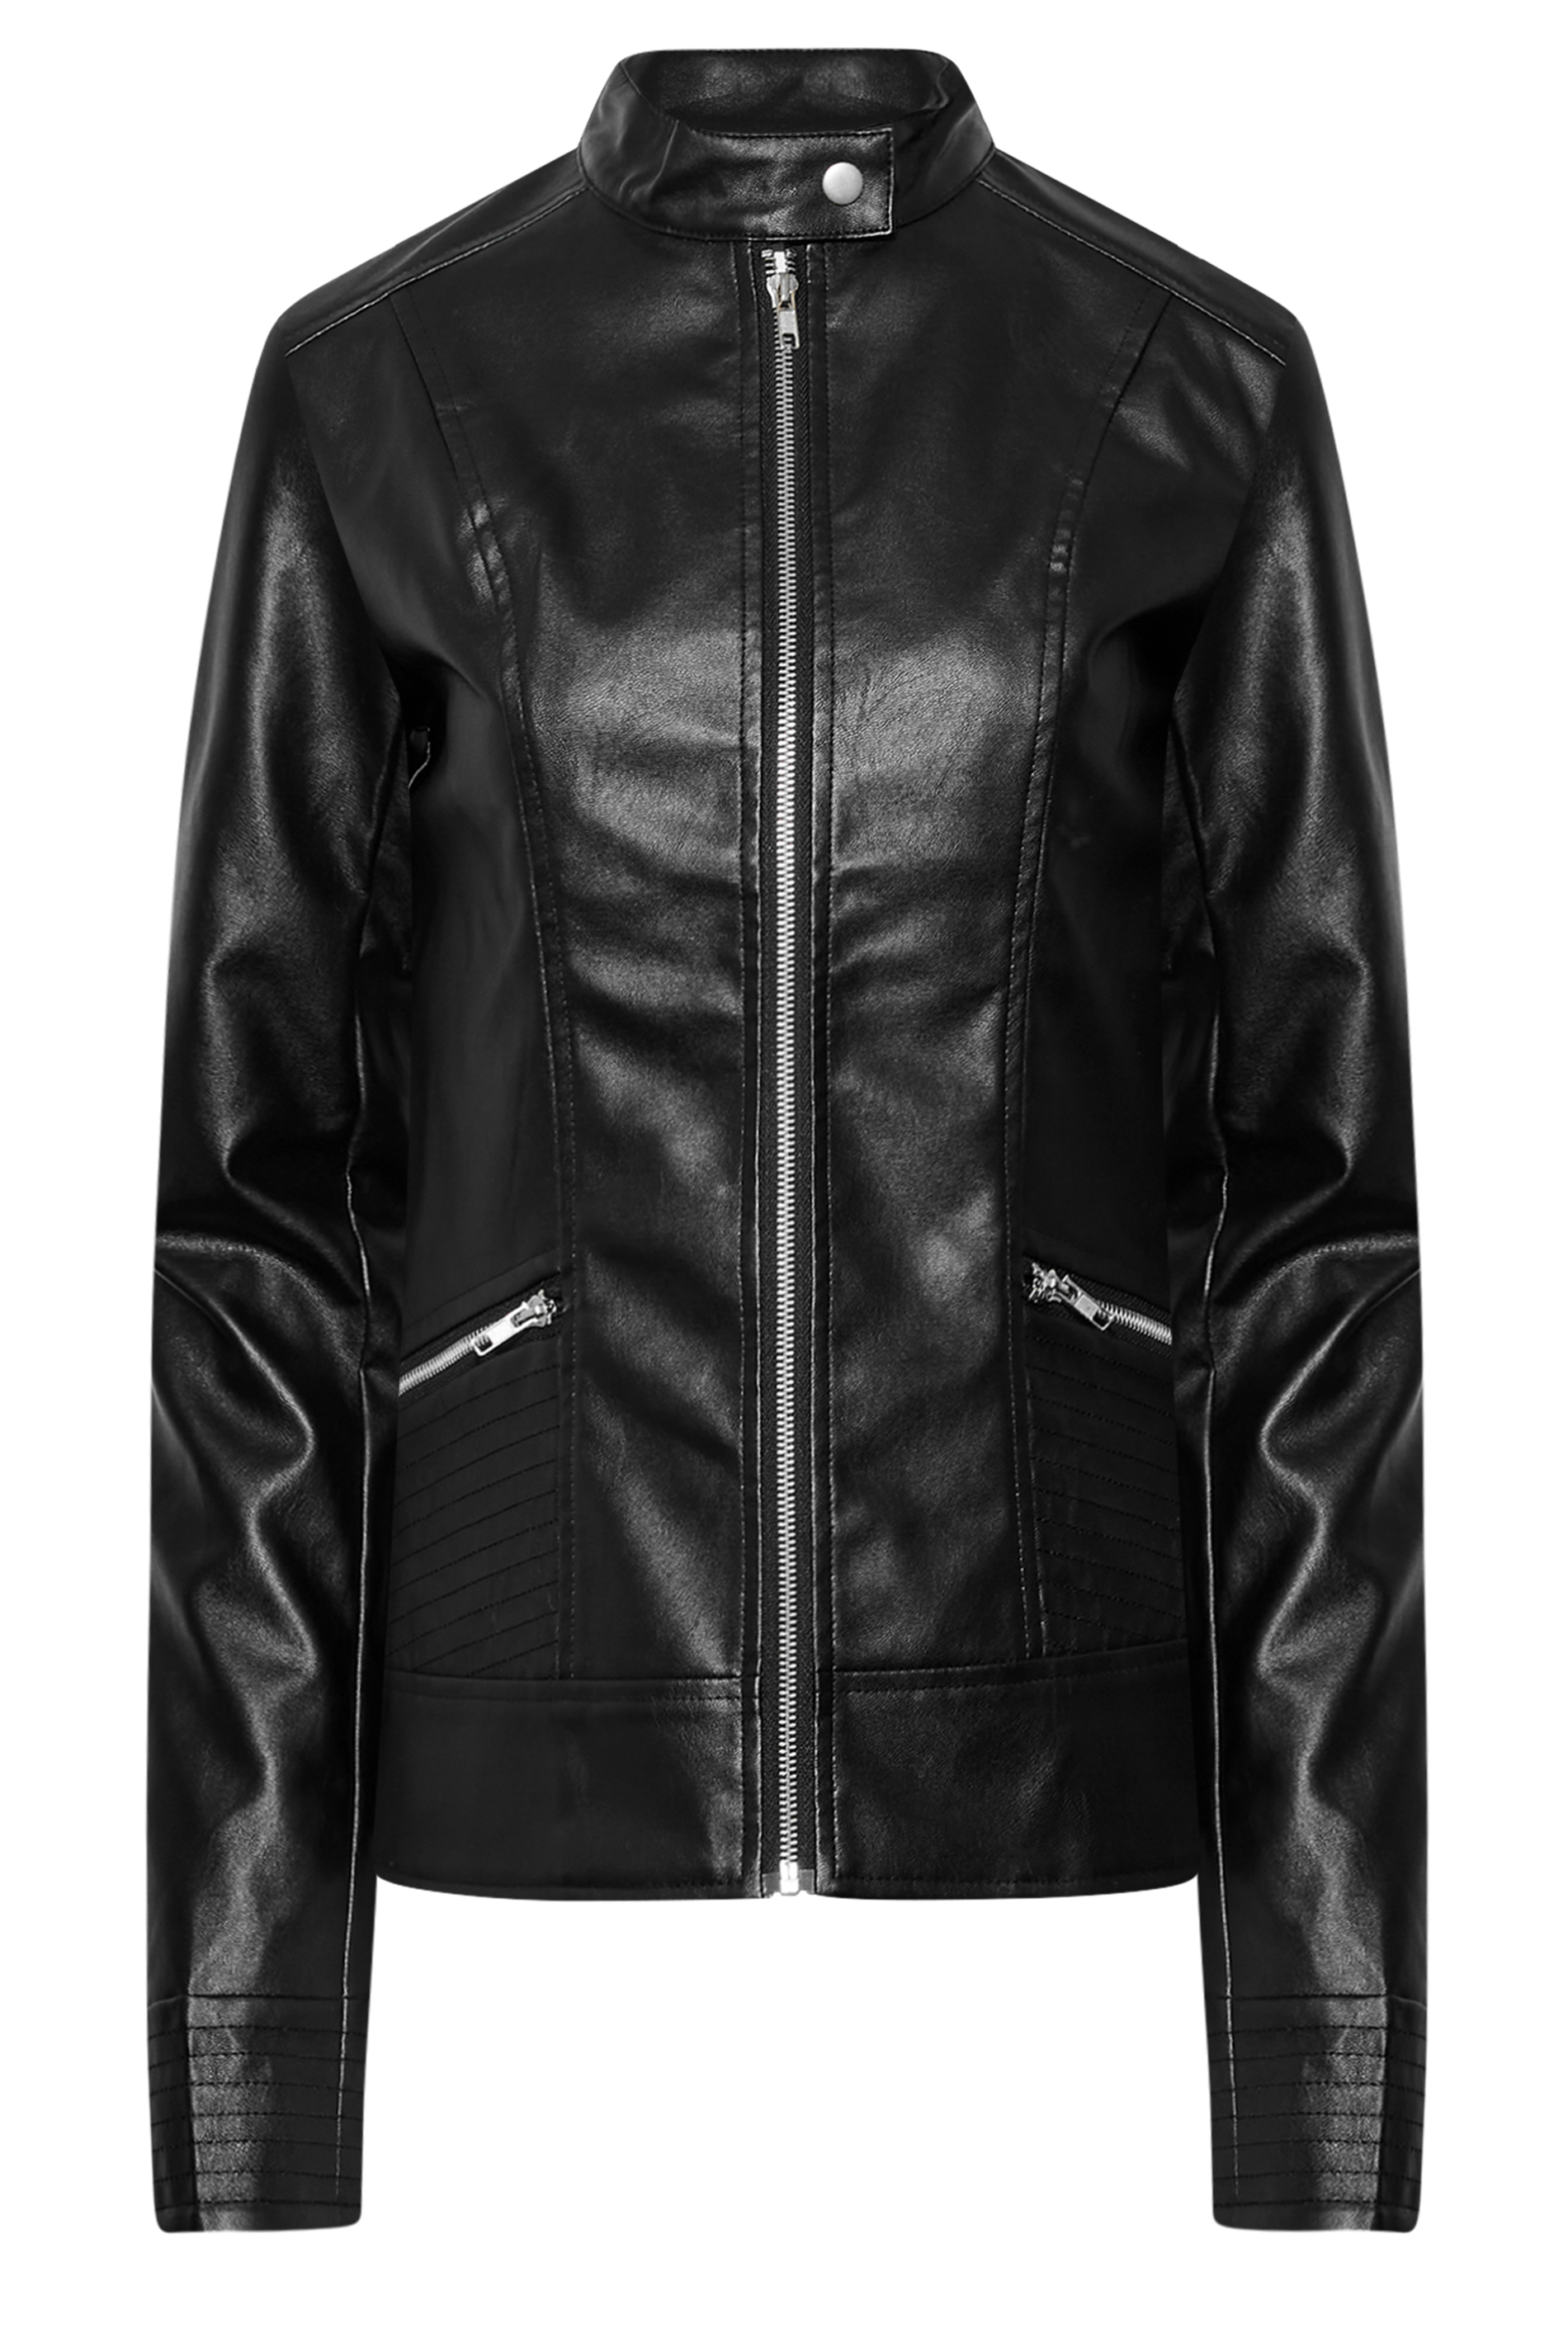 LTS Tall Black Women's Collarless Faux Leather Jacket | Long Tall Sally 2